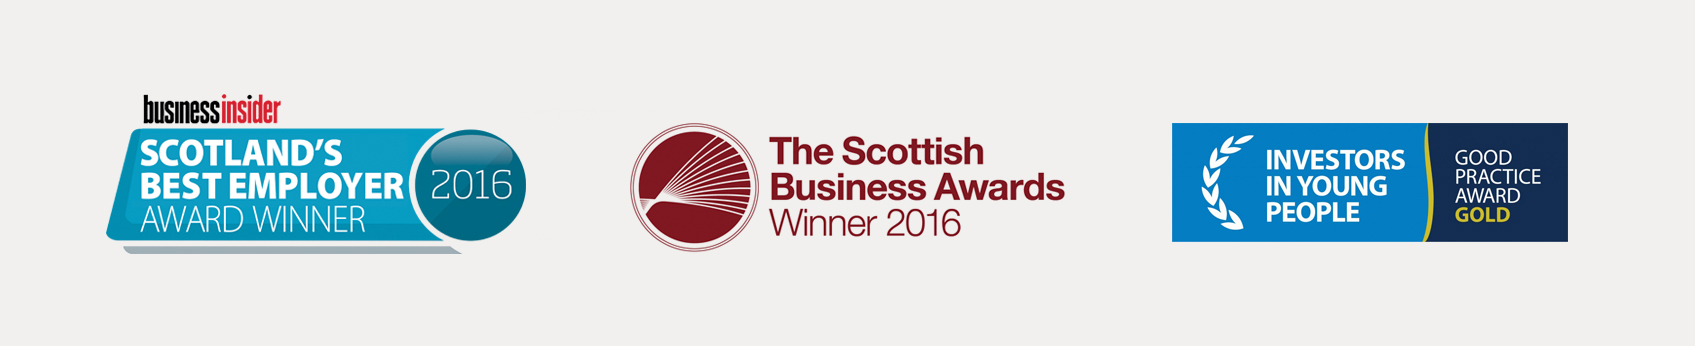 Scotland Best Employer, The Scottish Business Awards, Investors in Young People